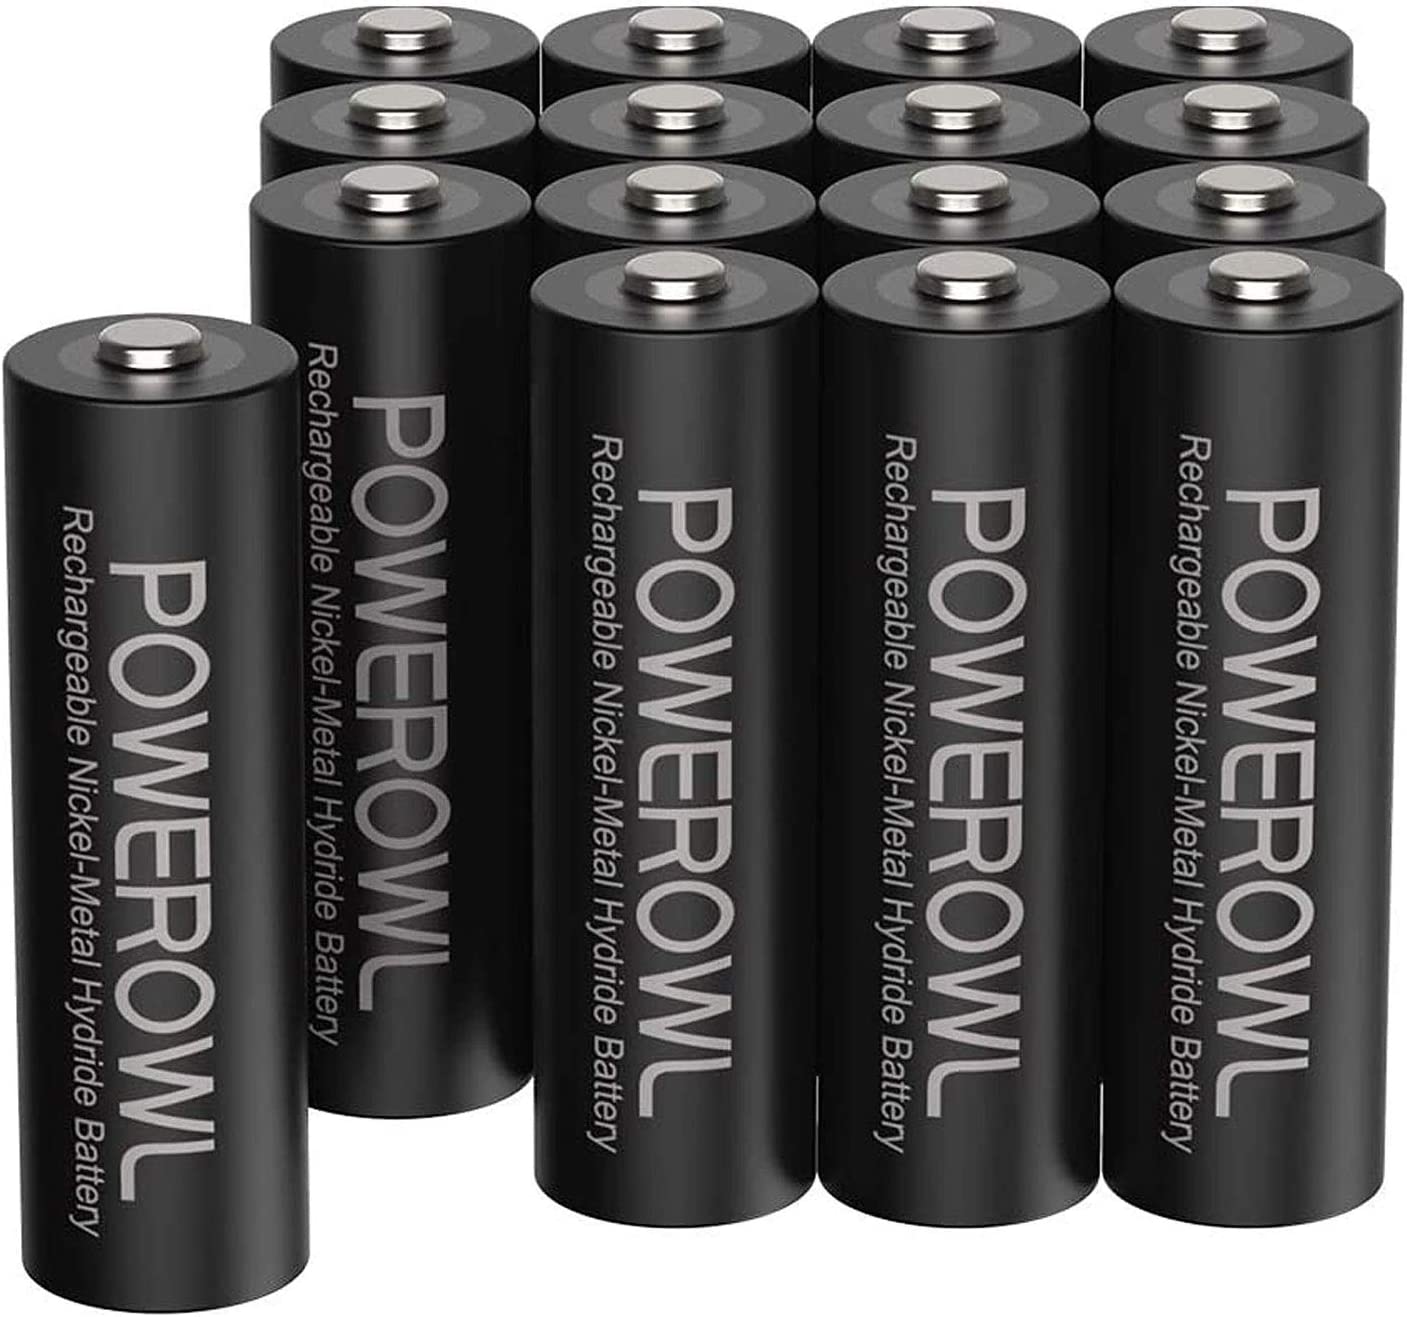 Amazon.com: POWEROWL AA Rechargeable Batteries, 2800mAh High Capacity Batteries 1.2V NiMH Low Self Discharge, Pack of 16 : Health & Household $22.83